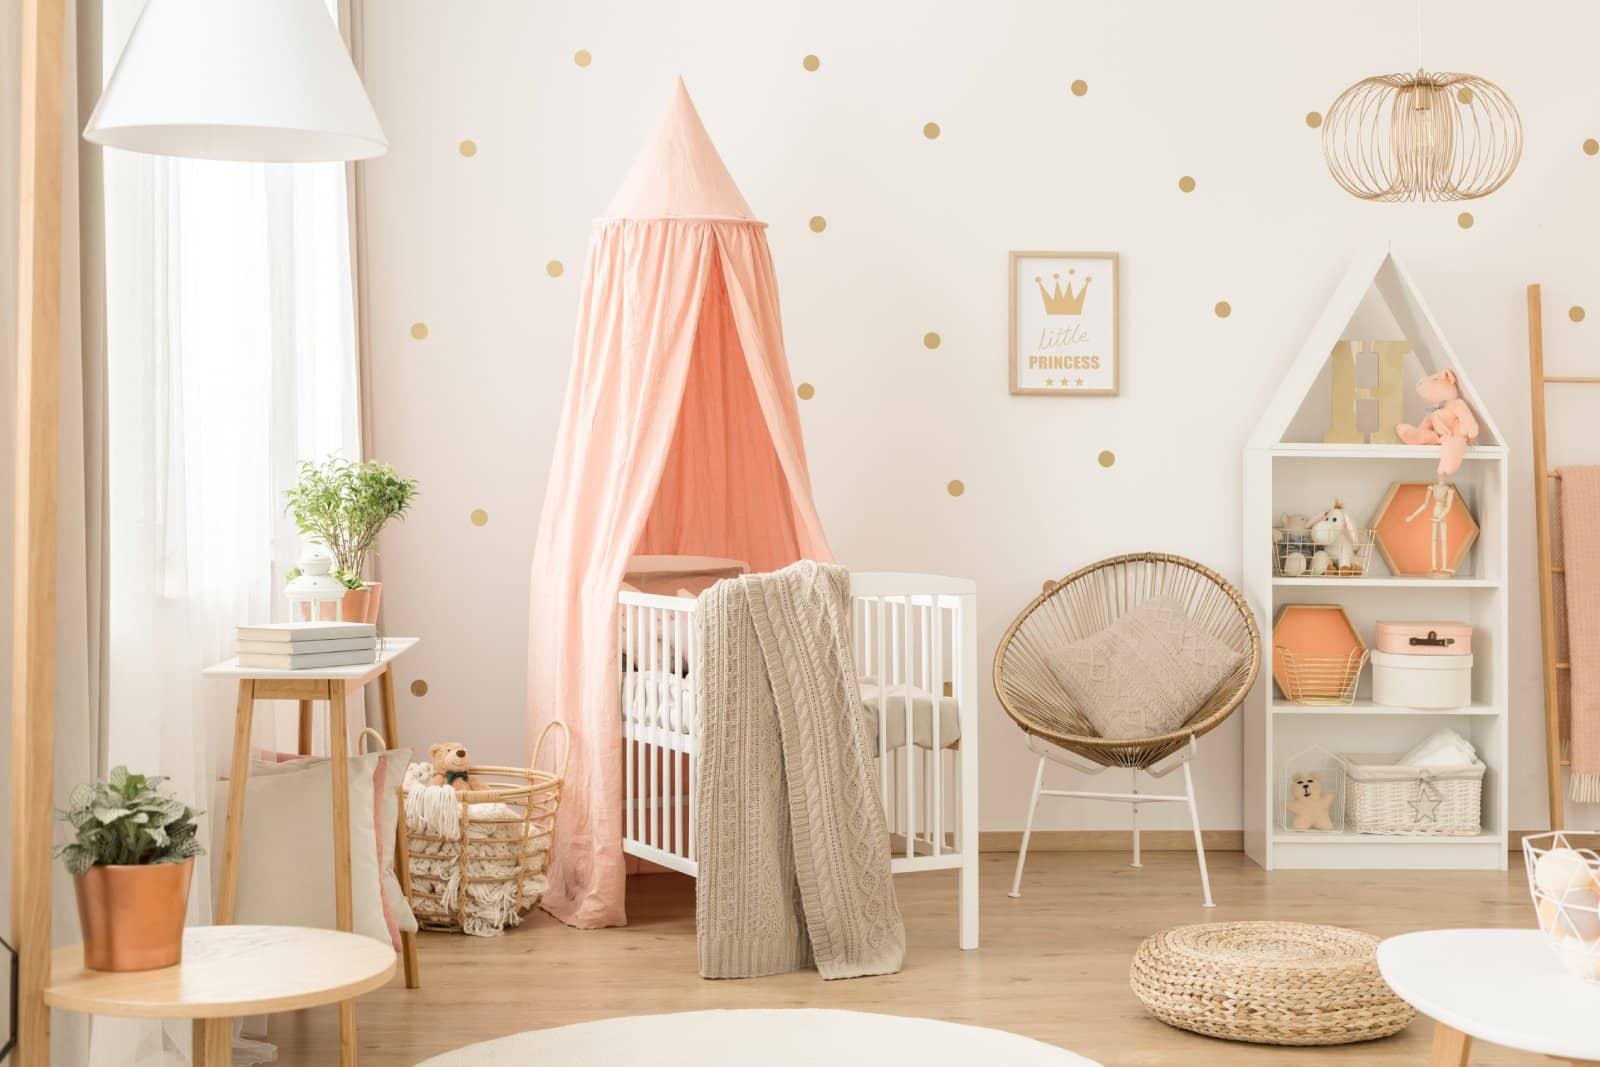 Image Credit: Shutterstock / Ground Picture <p><span>From designer baby gear to Instagram-worthy nursery decor, motherhood has become a commercial enterprise, pushing moms to consume and showcase a curated lifestyle.</span></p>